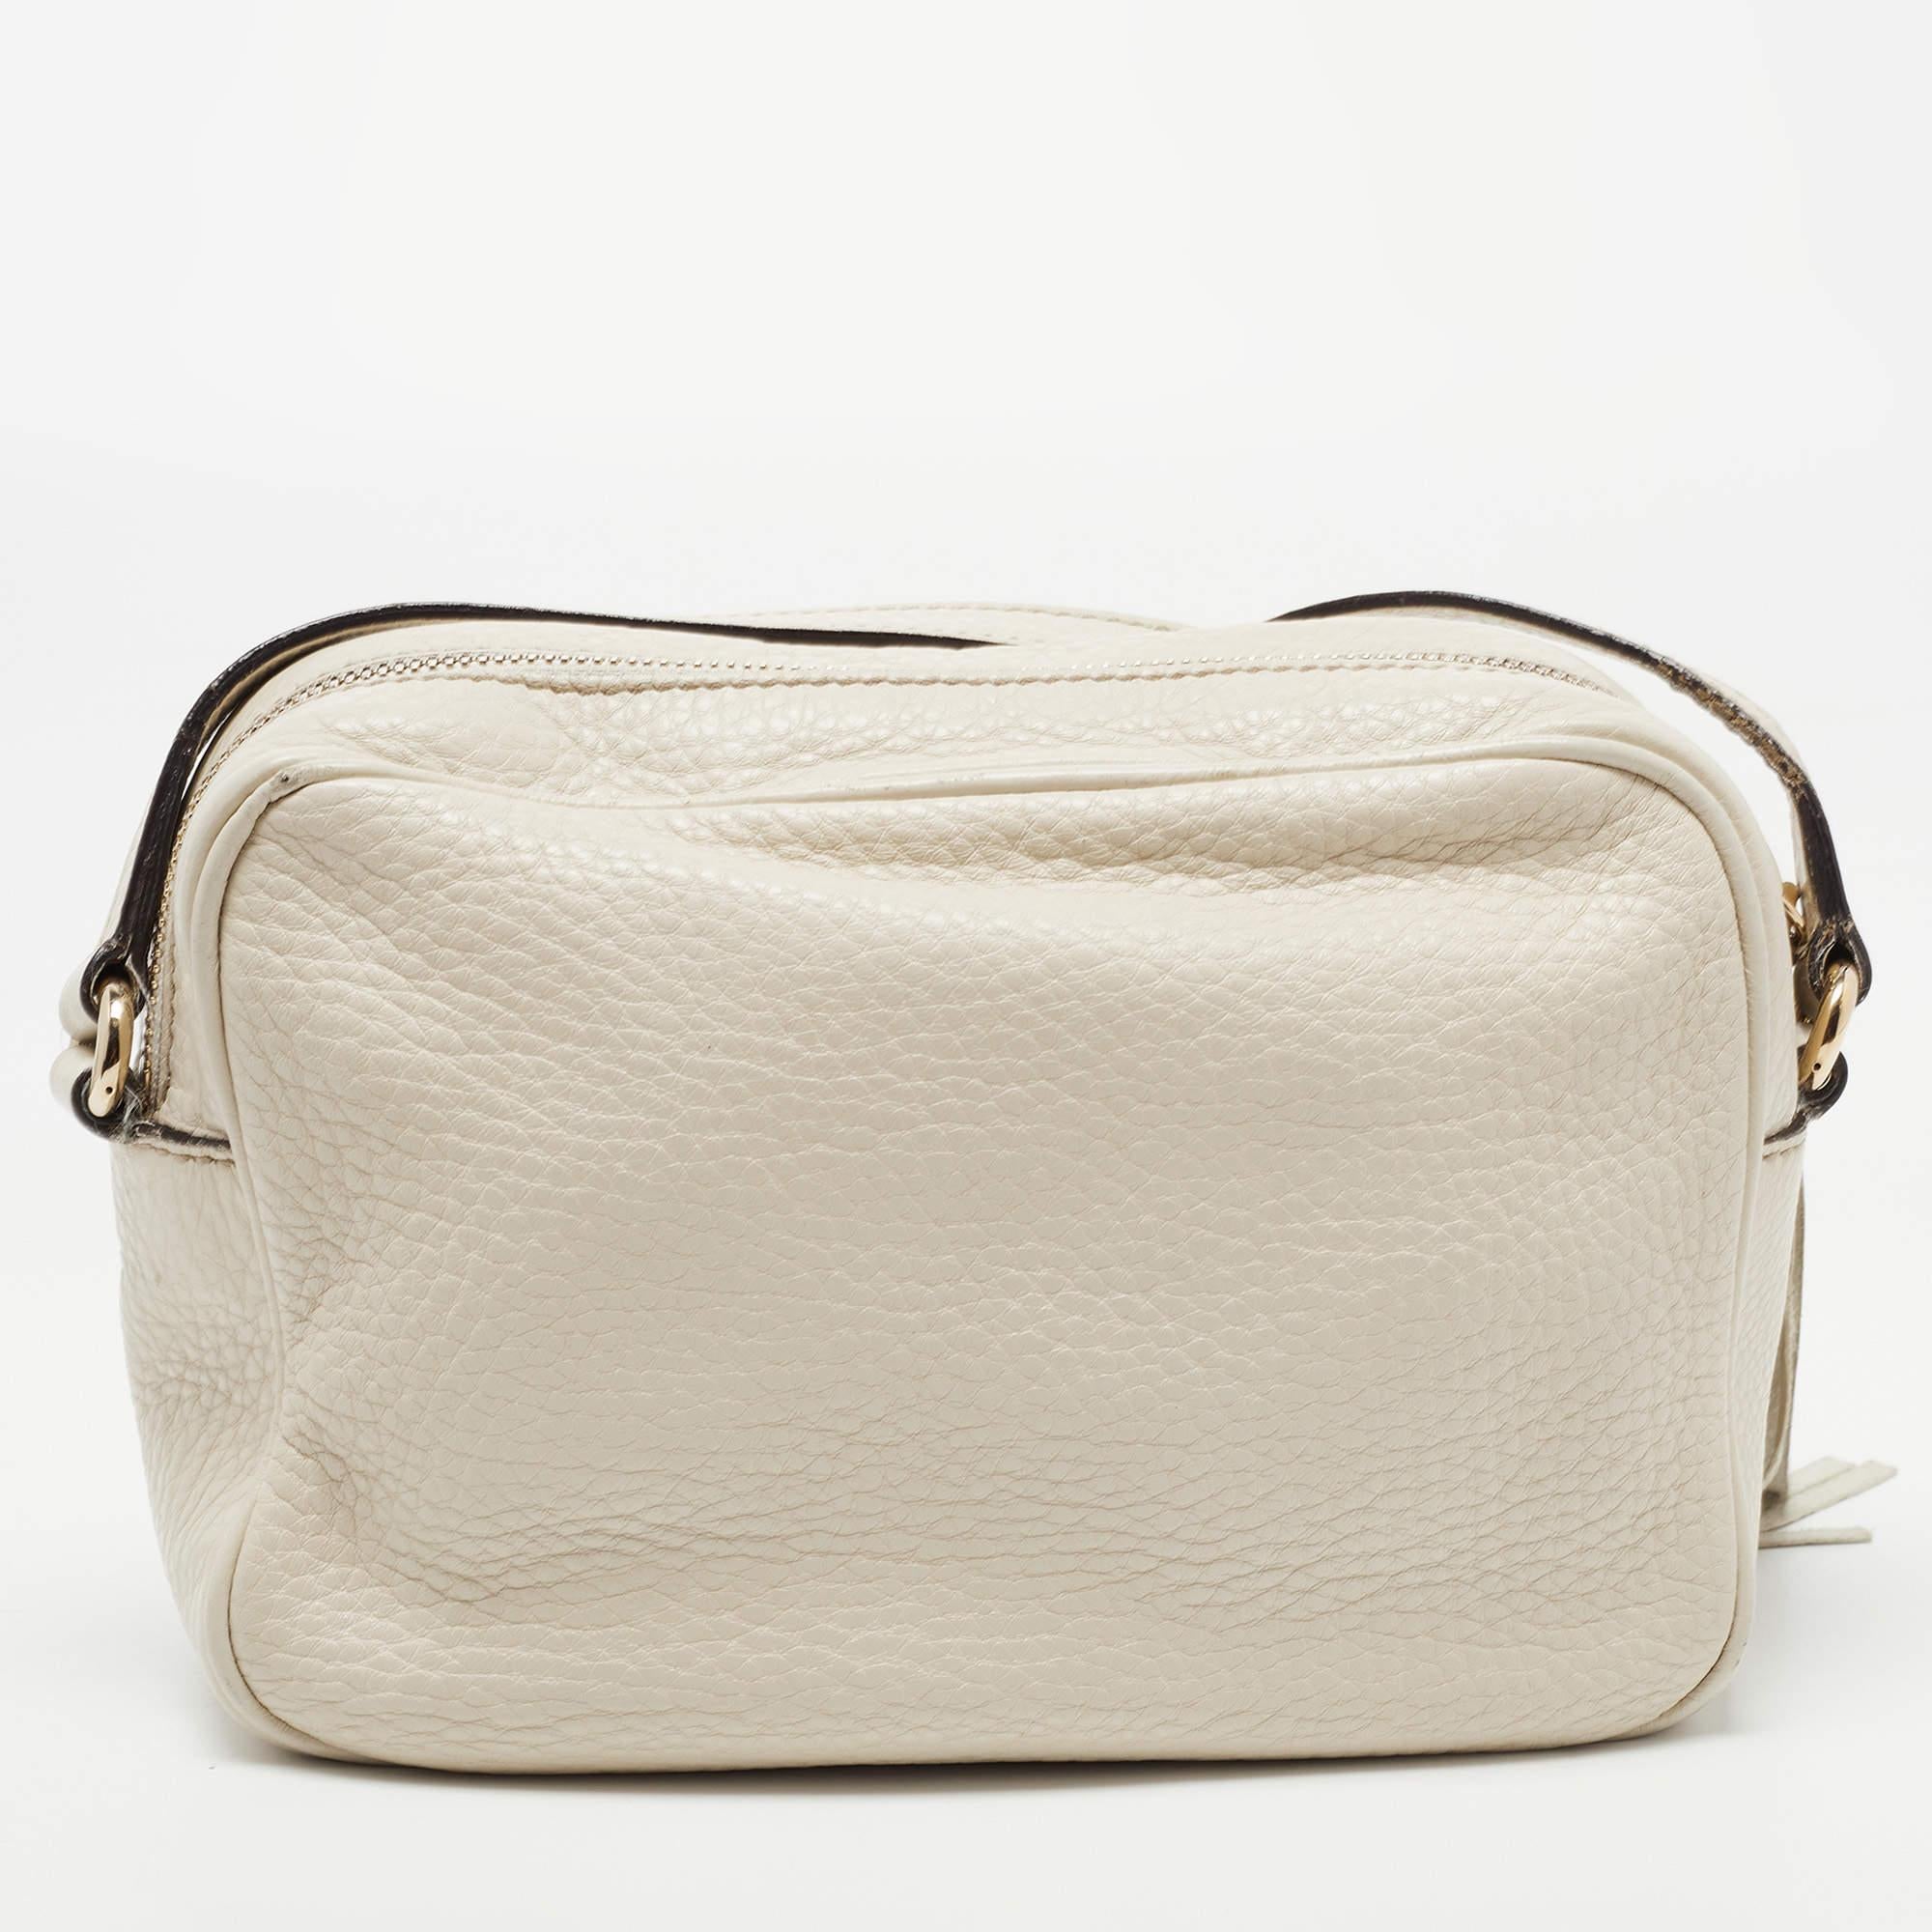 Thoughtful details, high quality, and everyday convenience mark this designer bag for women by Gucci. The bag is sewn with skill to deliver a refined look and an impeccable finish.

Includes: Brand Dustbag

